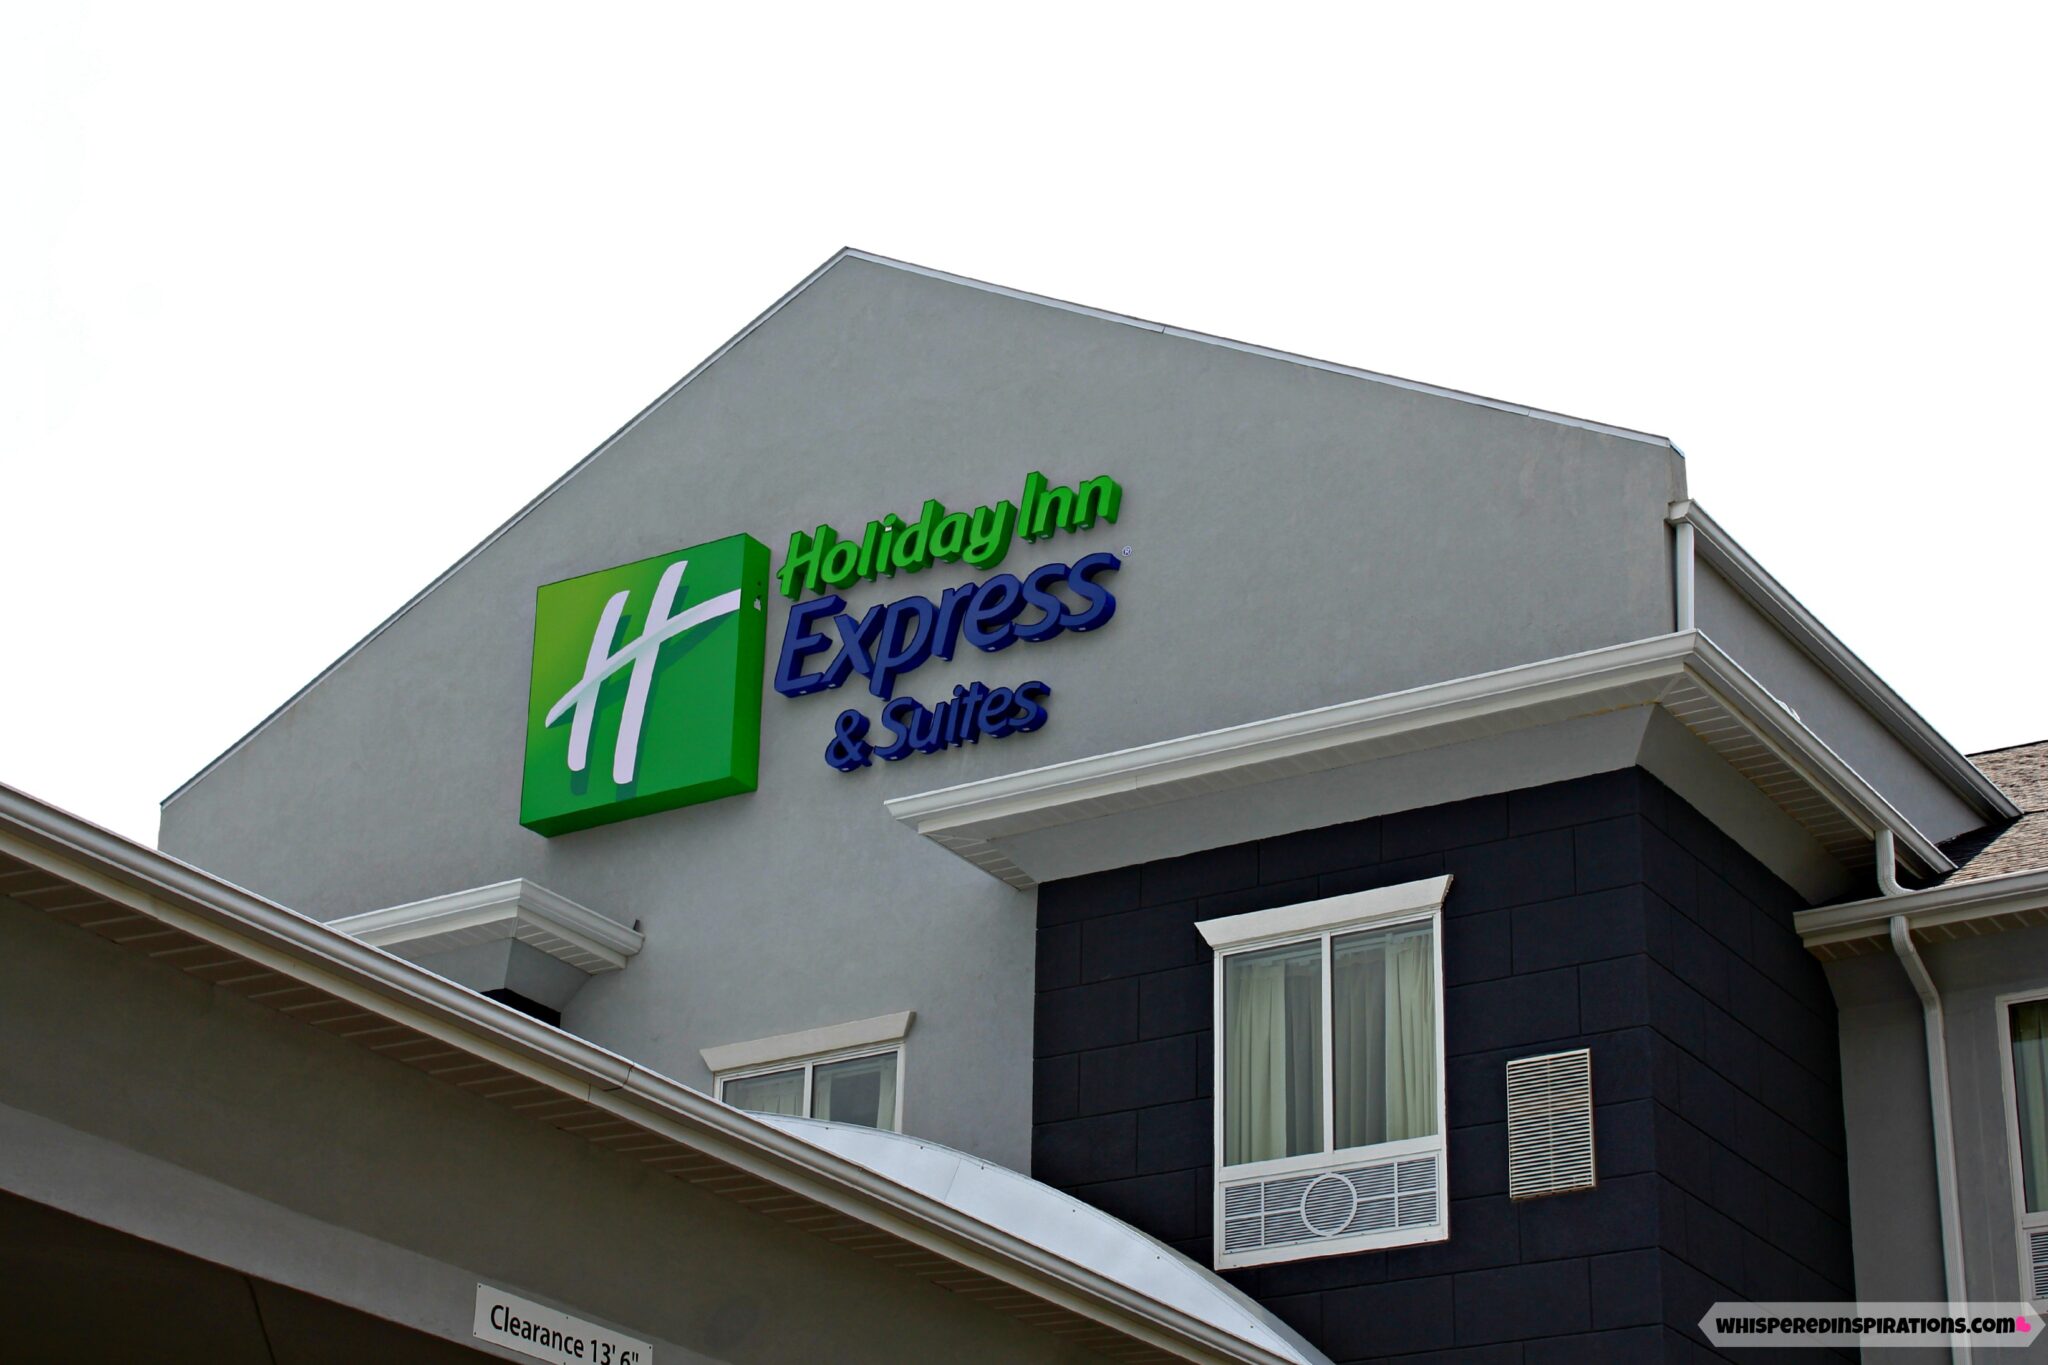 Holiday Inn Express & Suites: Check Out This Beautiful Gem in Fremont, Ohio! Stay Inspired, Get Refreshed and Relax with Your Family at the Holiday Inn Express! #travel